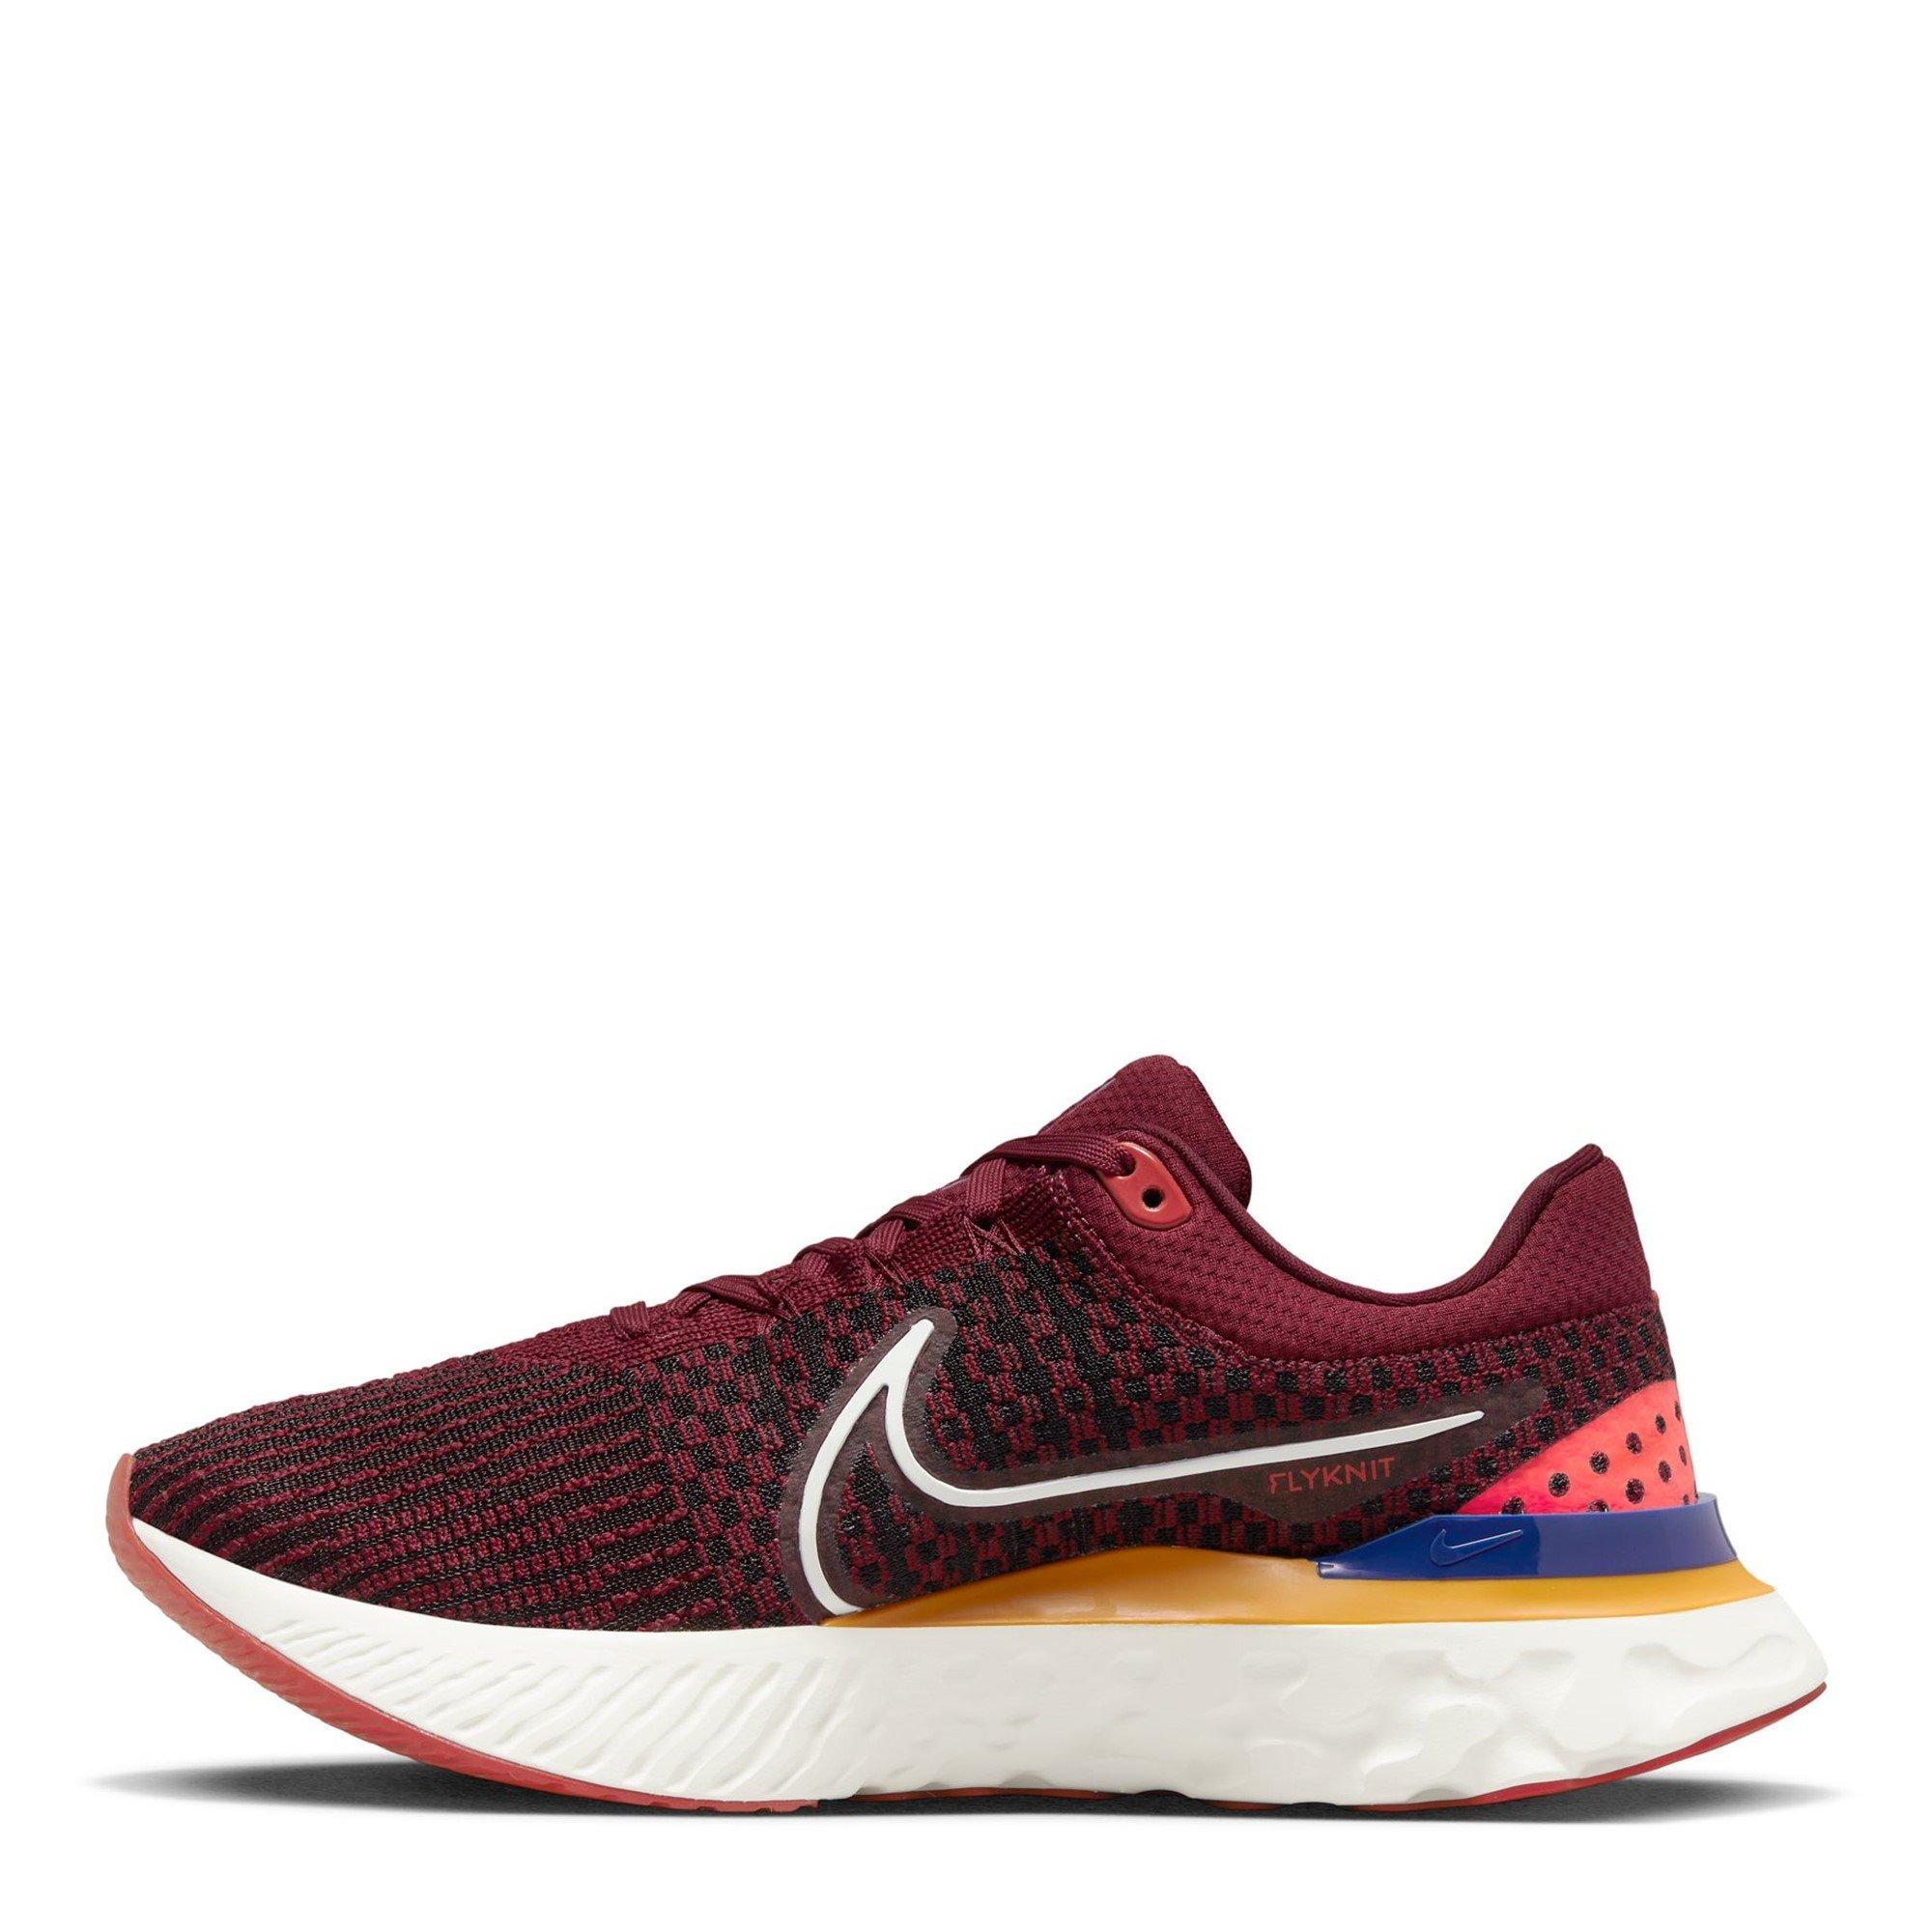 Nike | React Infinity Run Flyknit 3 Mens Running Shoes | Everyday ...